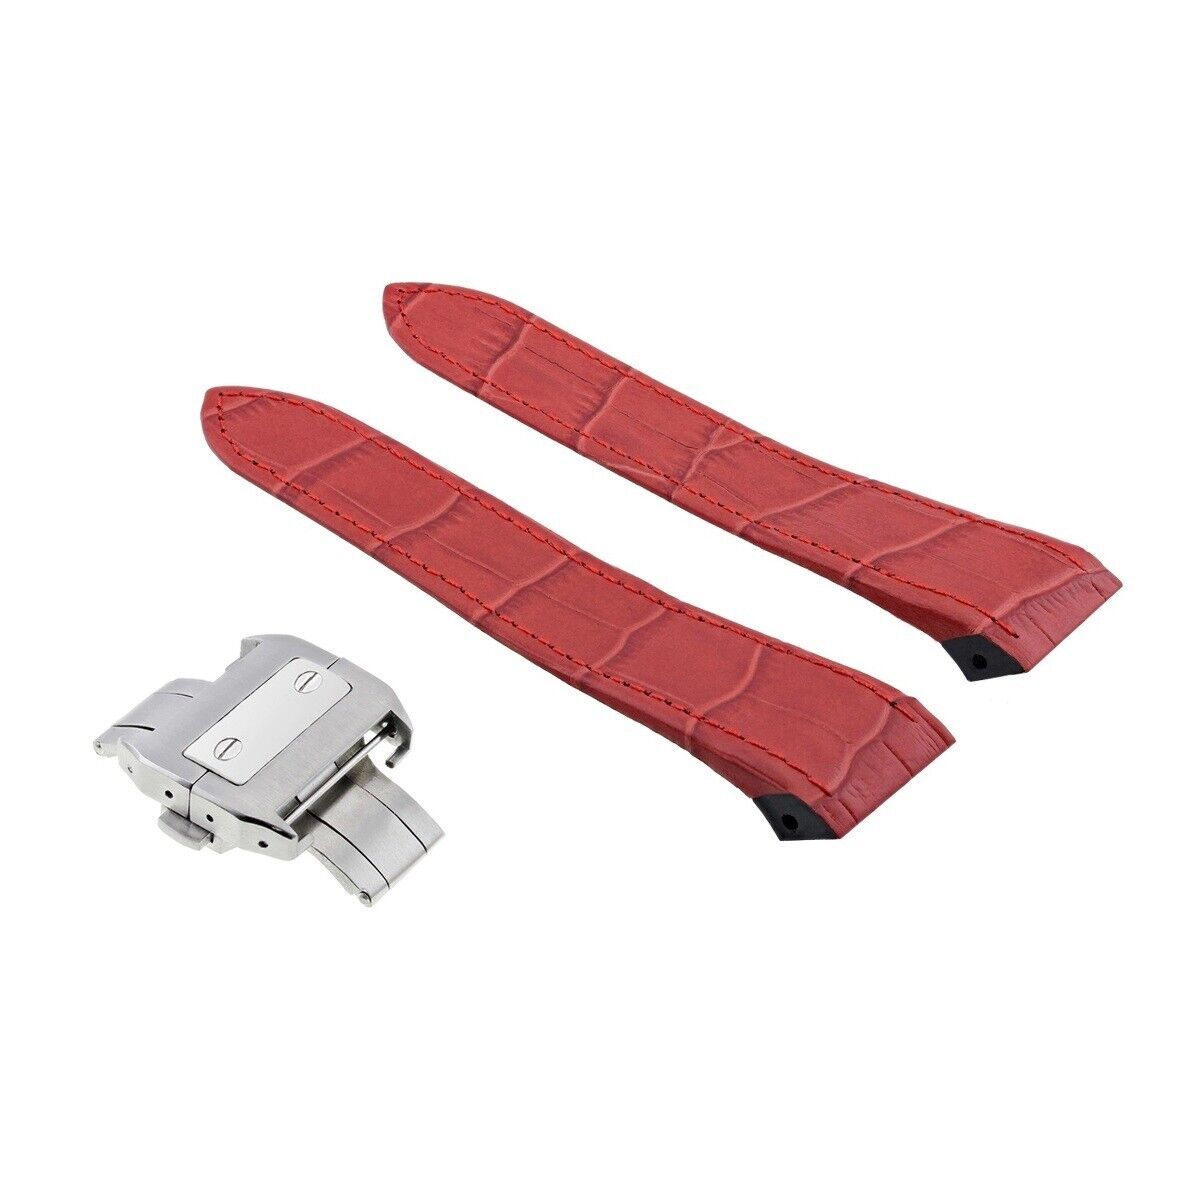 COMPLETE 23MM LEATHER WATCH BAND DEPLOYMENT CLASP FOR 38MM CARTIER SANTOS XL RED - image 2 of 2